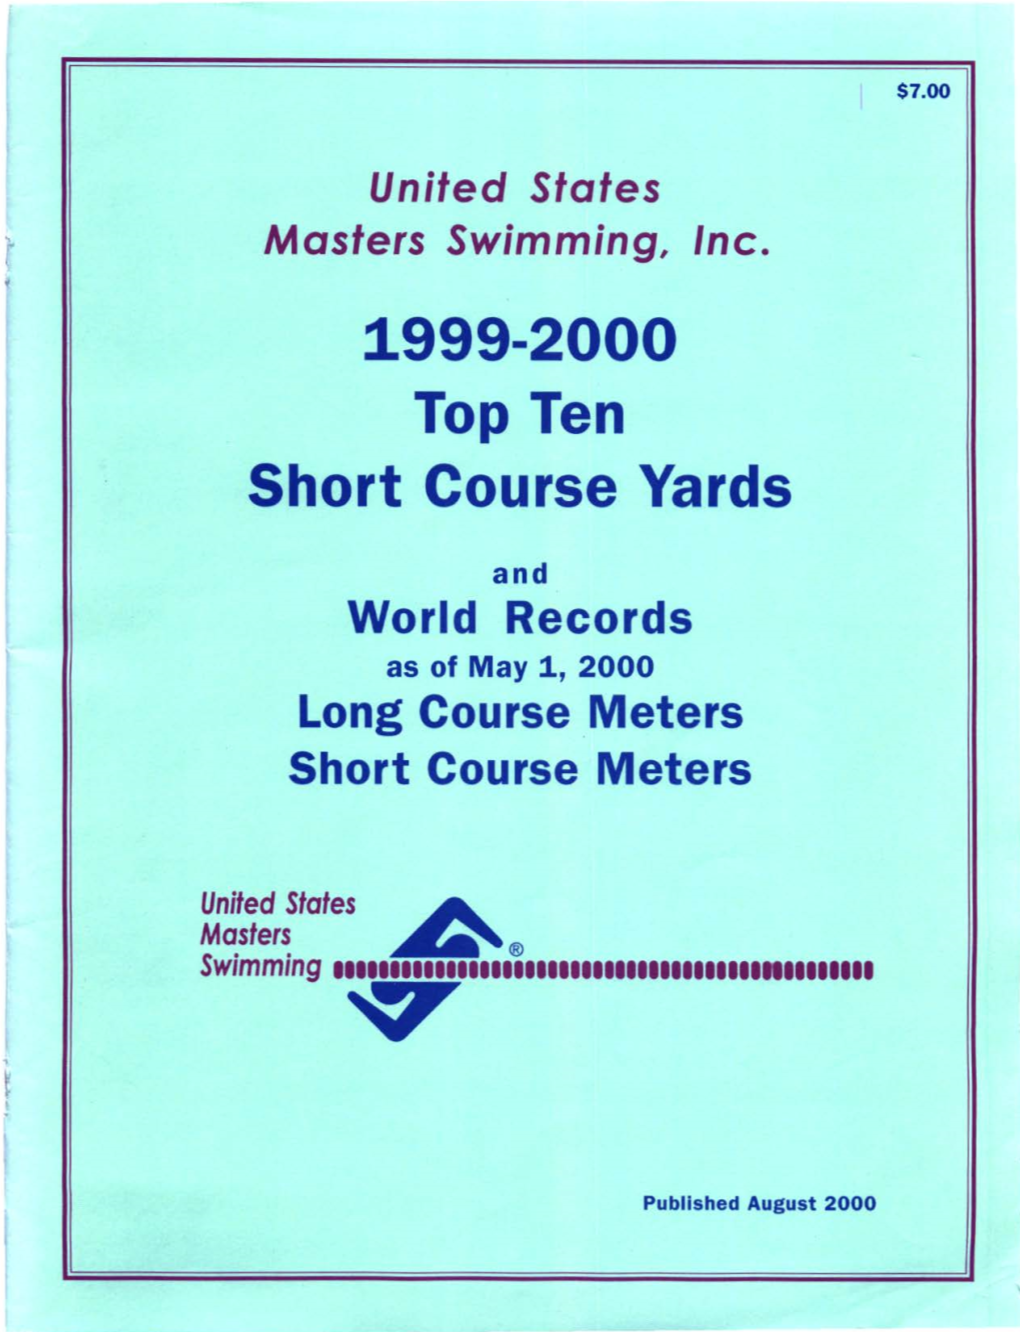 Short Course Yards